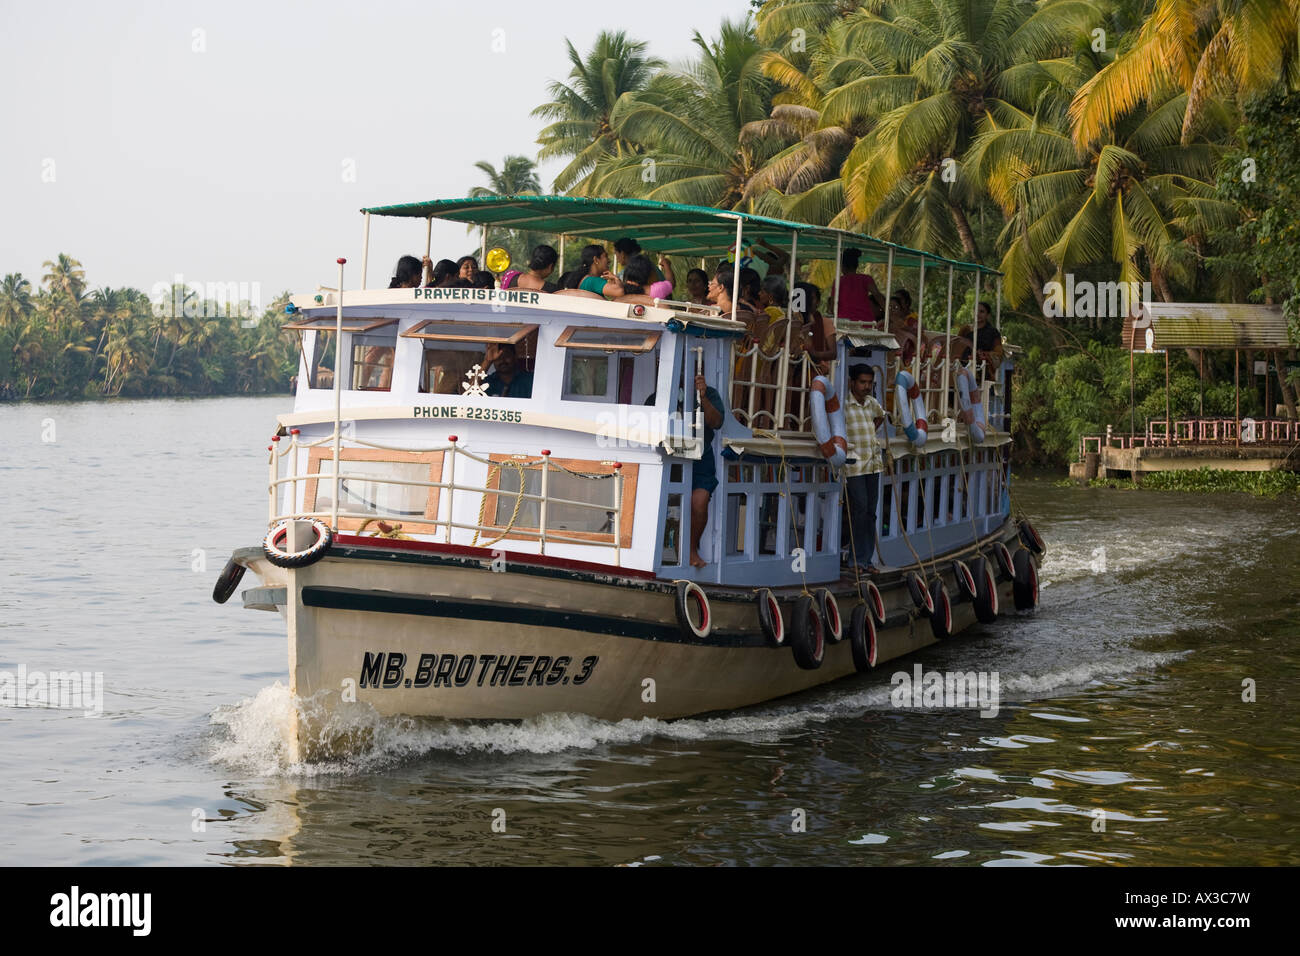 Commuters on a ferry boat on the river, near Kainakary, Alleppey District, Kerala, India Stock Photo